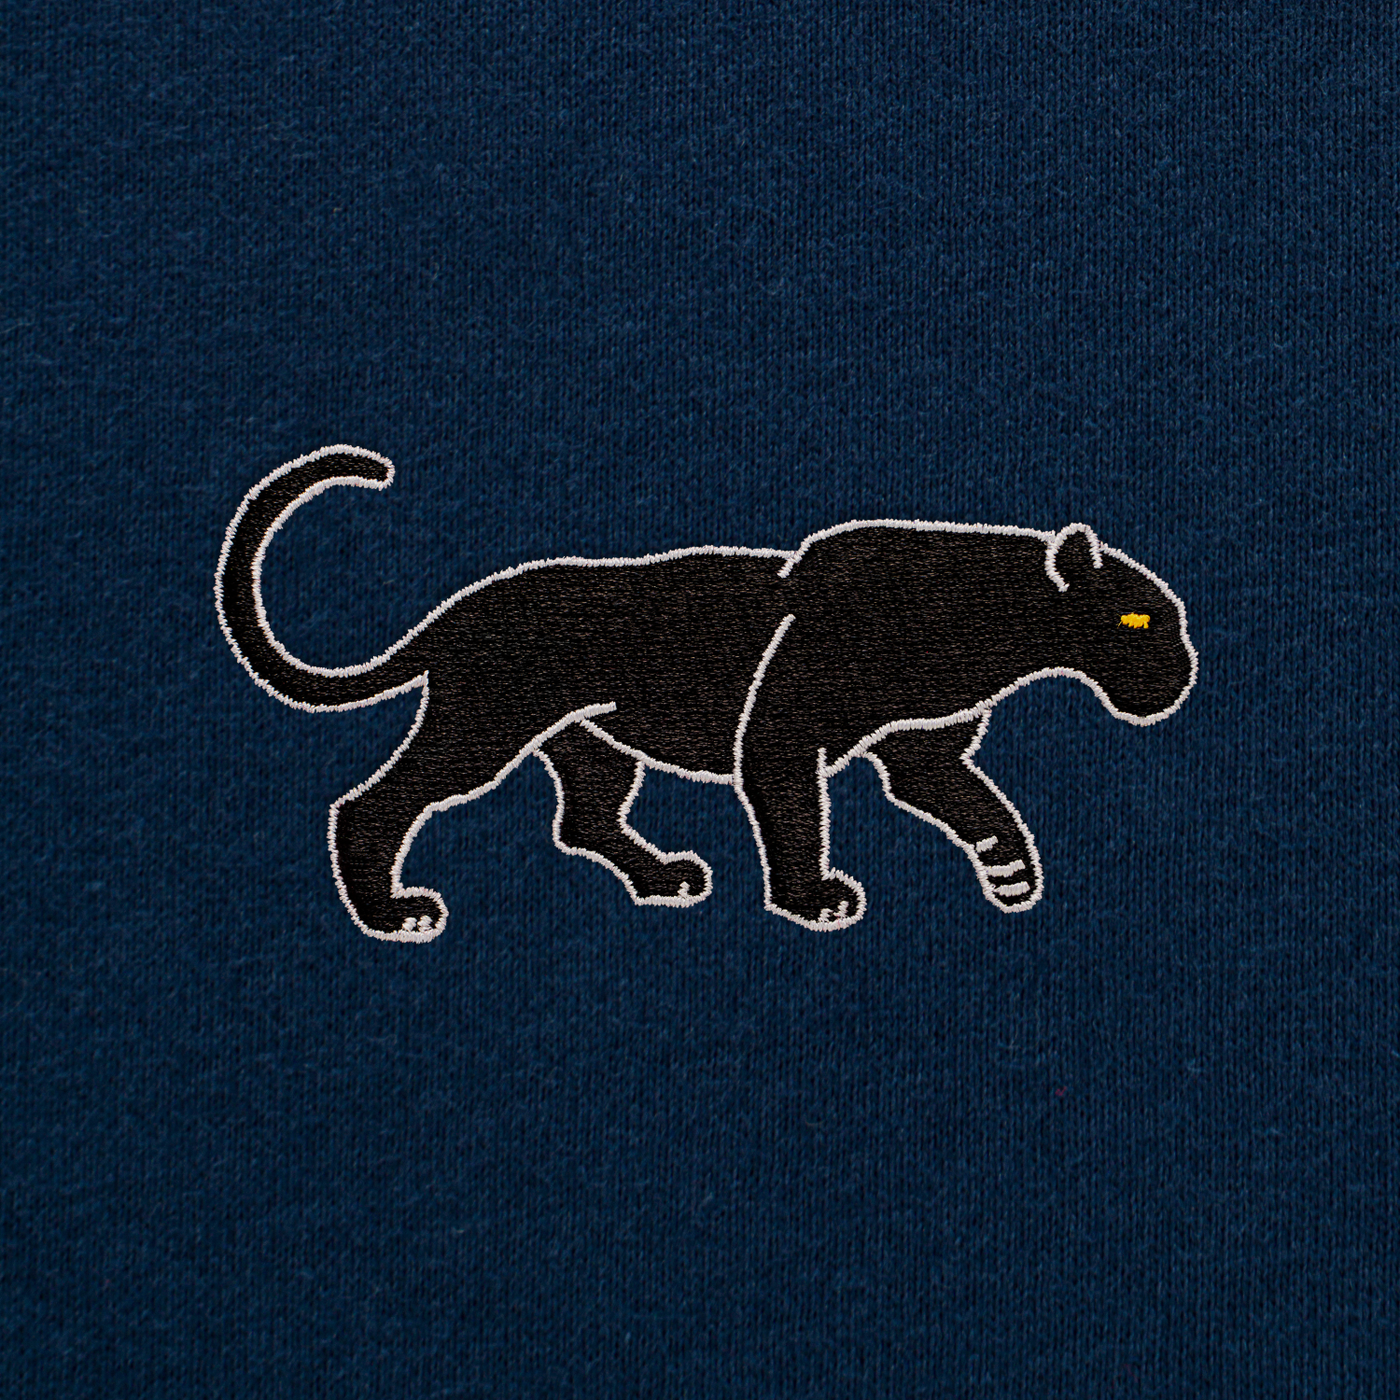 Bobby's Planet Men's Embroidered Black Jaguar Long Sleeve Shirt from South American Amazon Animals Collection in Navy Color#color_navy